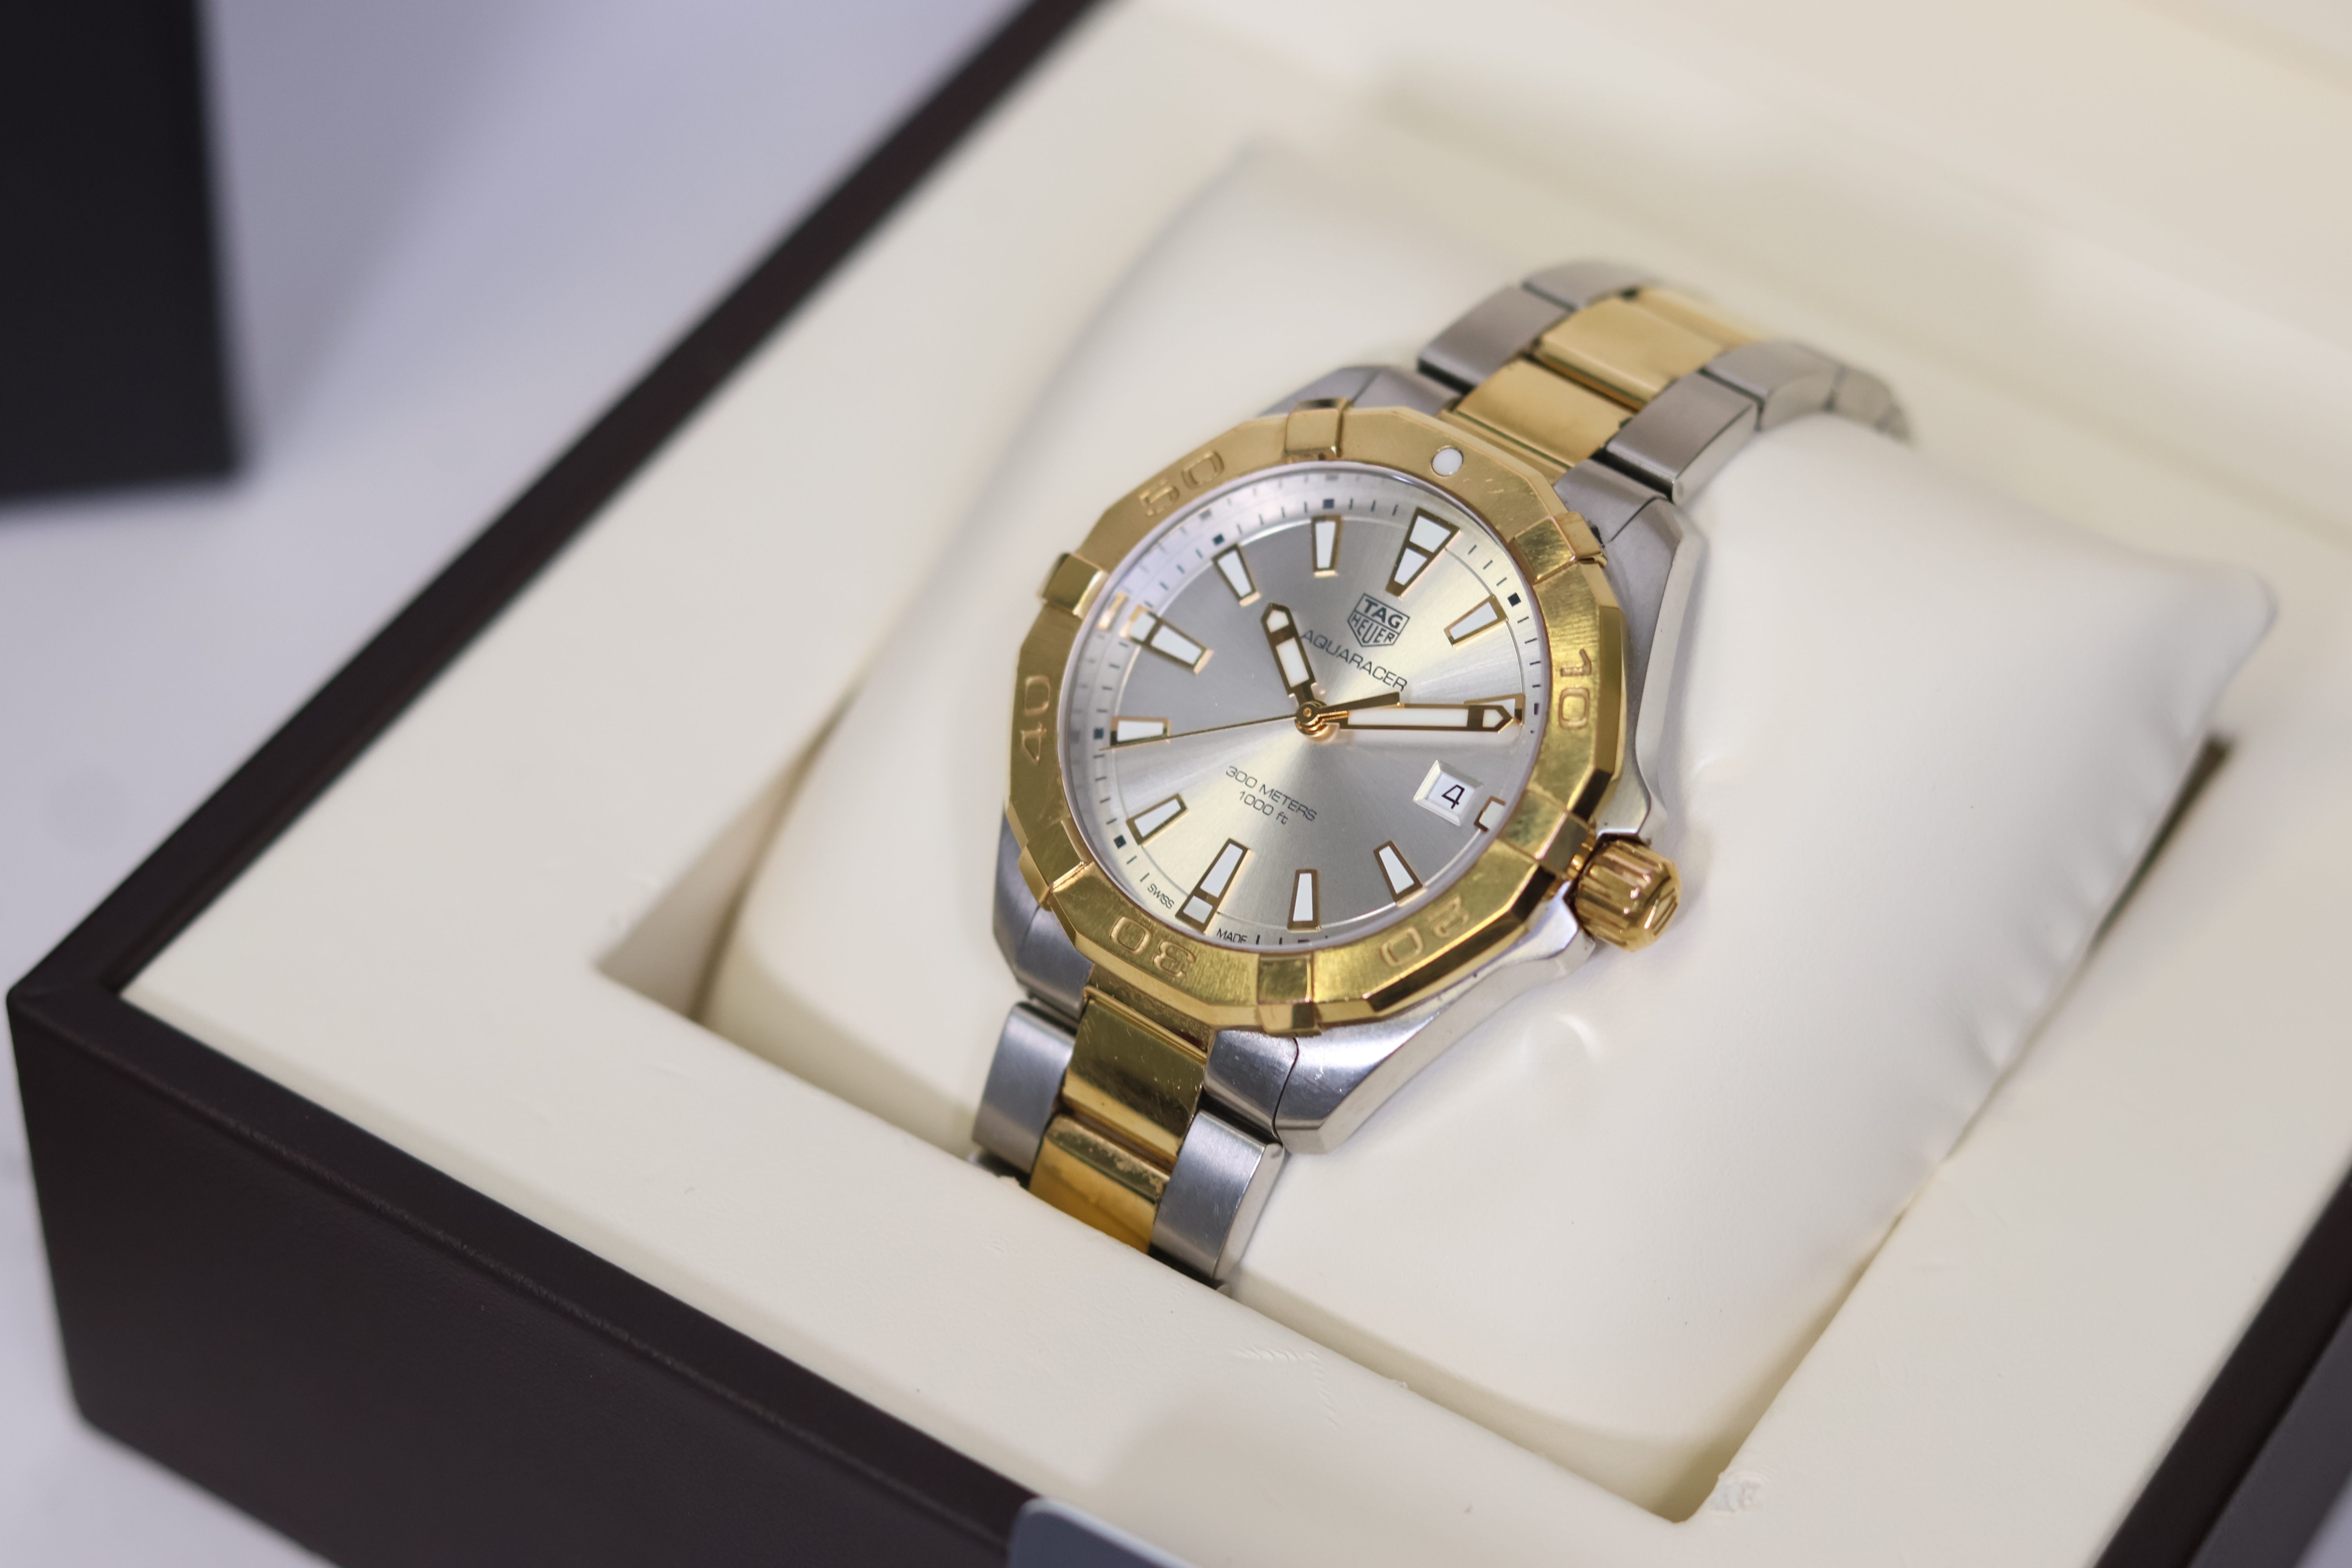 TAG HEUER AQUARACER 300M QUARTZ WATCH REFERENCE WBD1120, W/BOX AND PAPERS 2021. Approx 41mm - Image 3 of 9